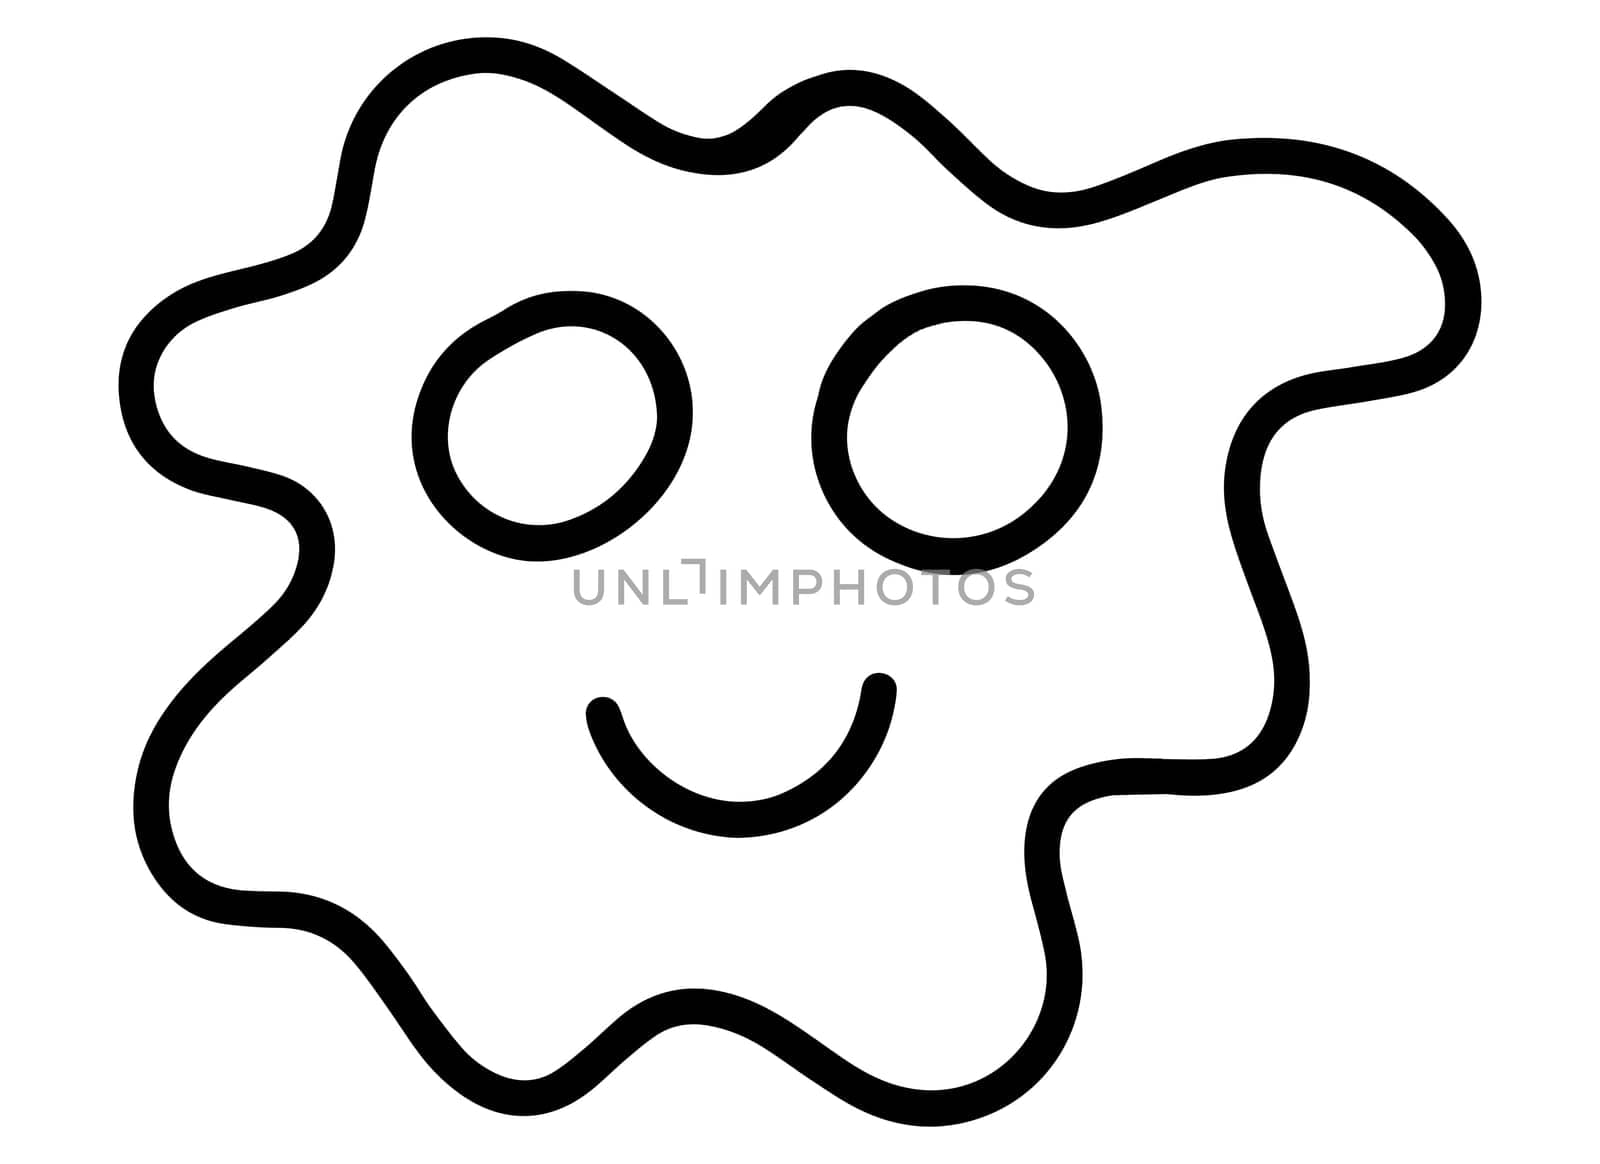 Printable Coloring Page for Kids. Black and White Smiley Face Isolated Illustration. by Rina_Dozornaya